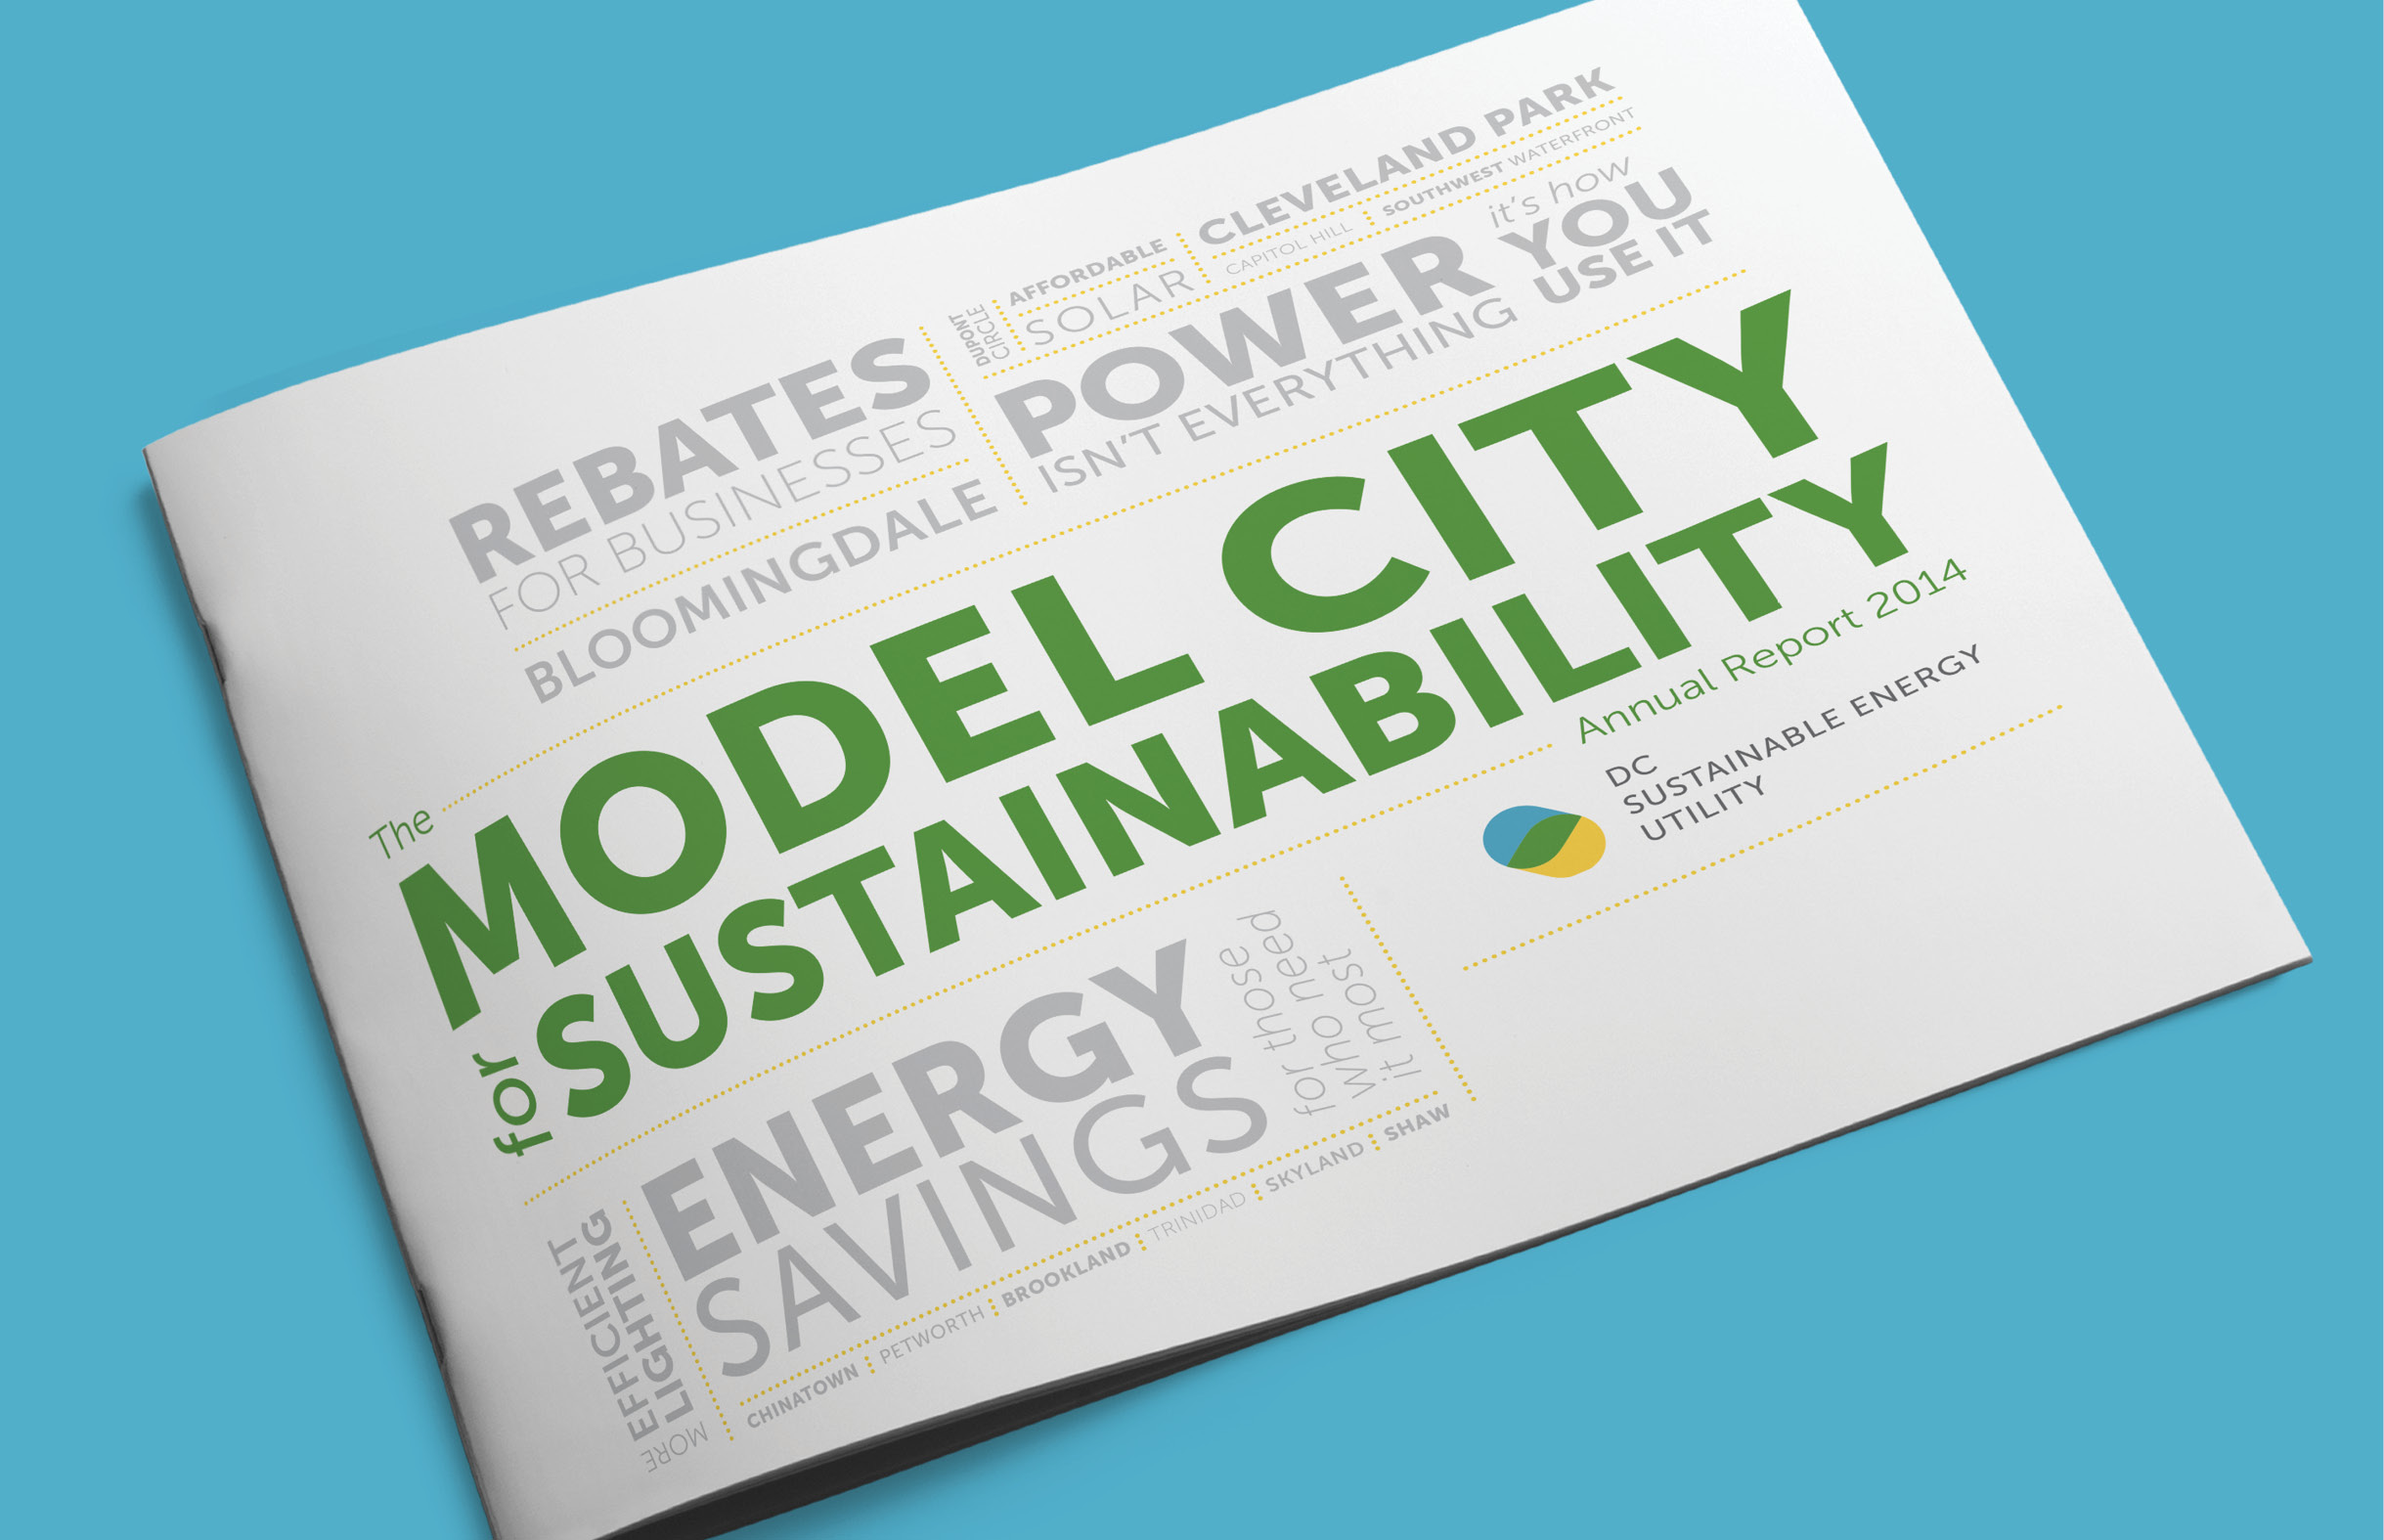 The mostly white cover of the DCSEU annual report has a word cloud of DC neighborhoods in grey and the title ‘Model City for Sustainability’ in Green. The report is landscaped letter sized, saddle stitched on a blue background.